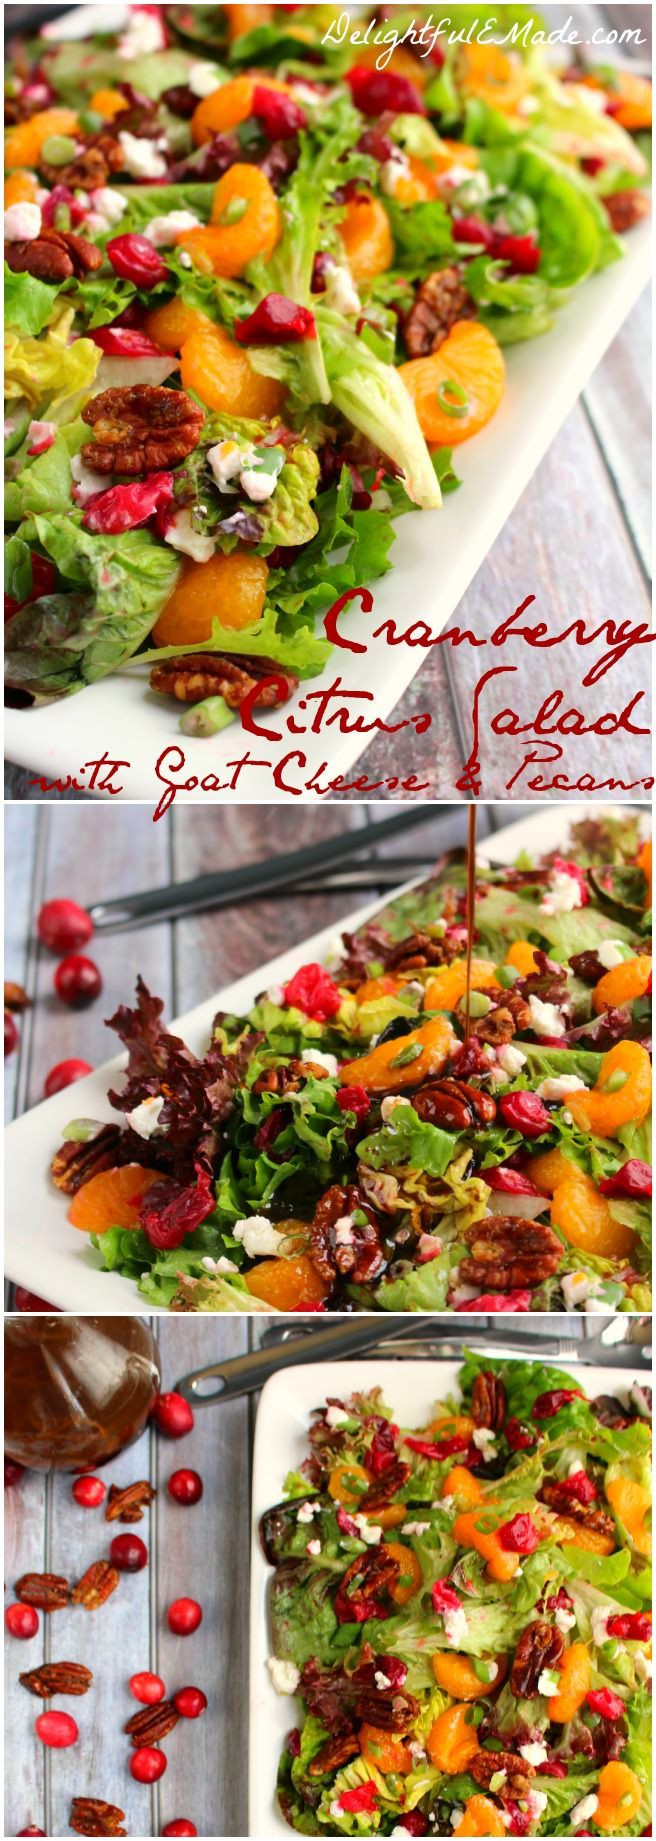 Salad For Christmas Dinner
 253 best images about Recipes for Salads on Pinterest